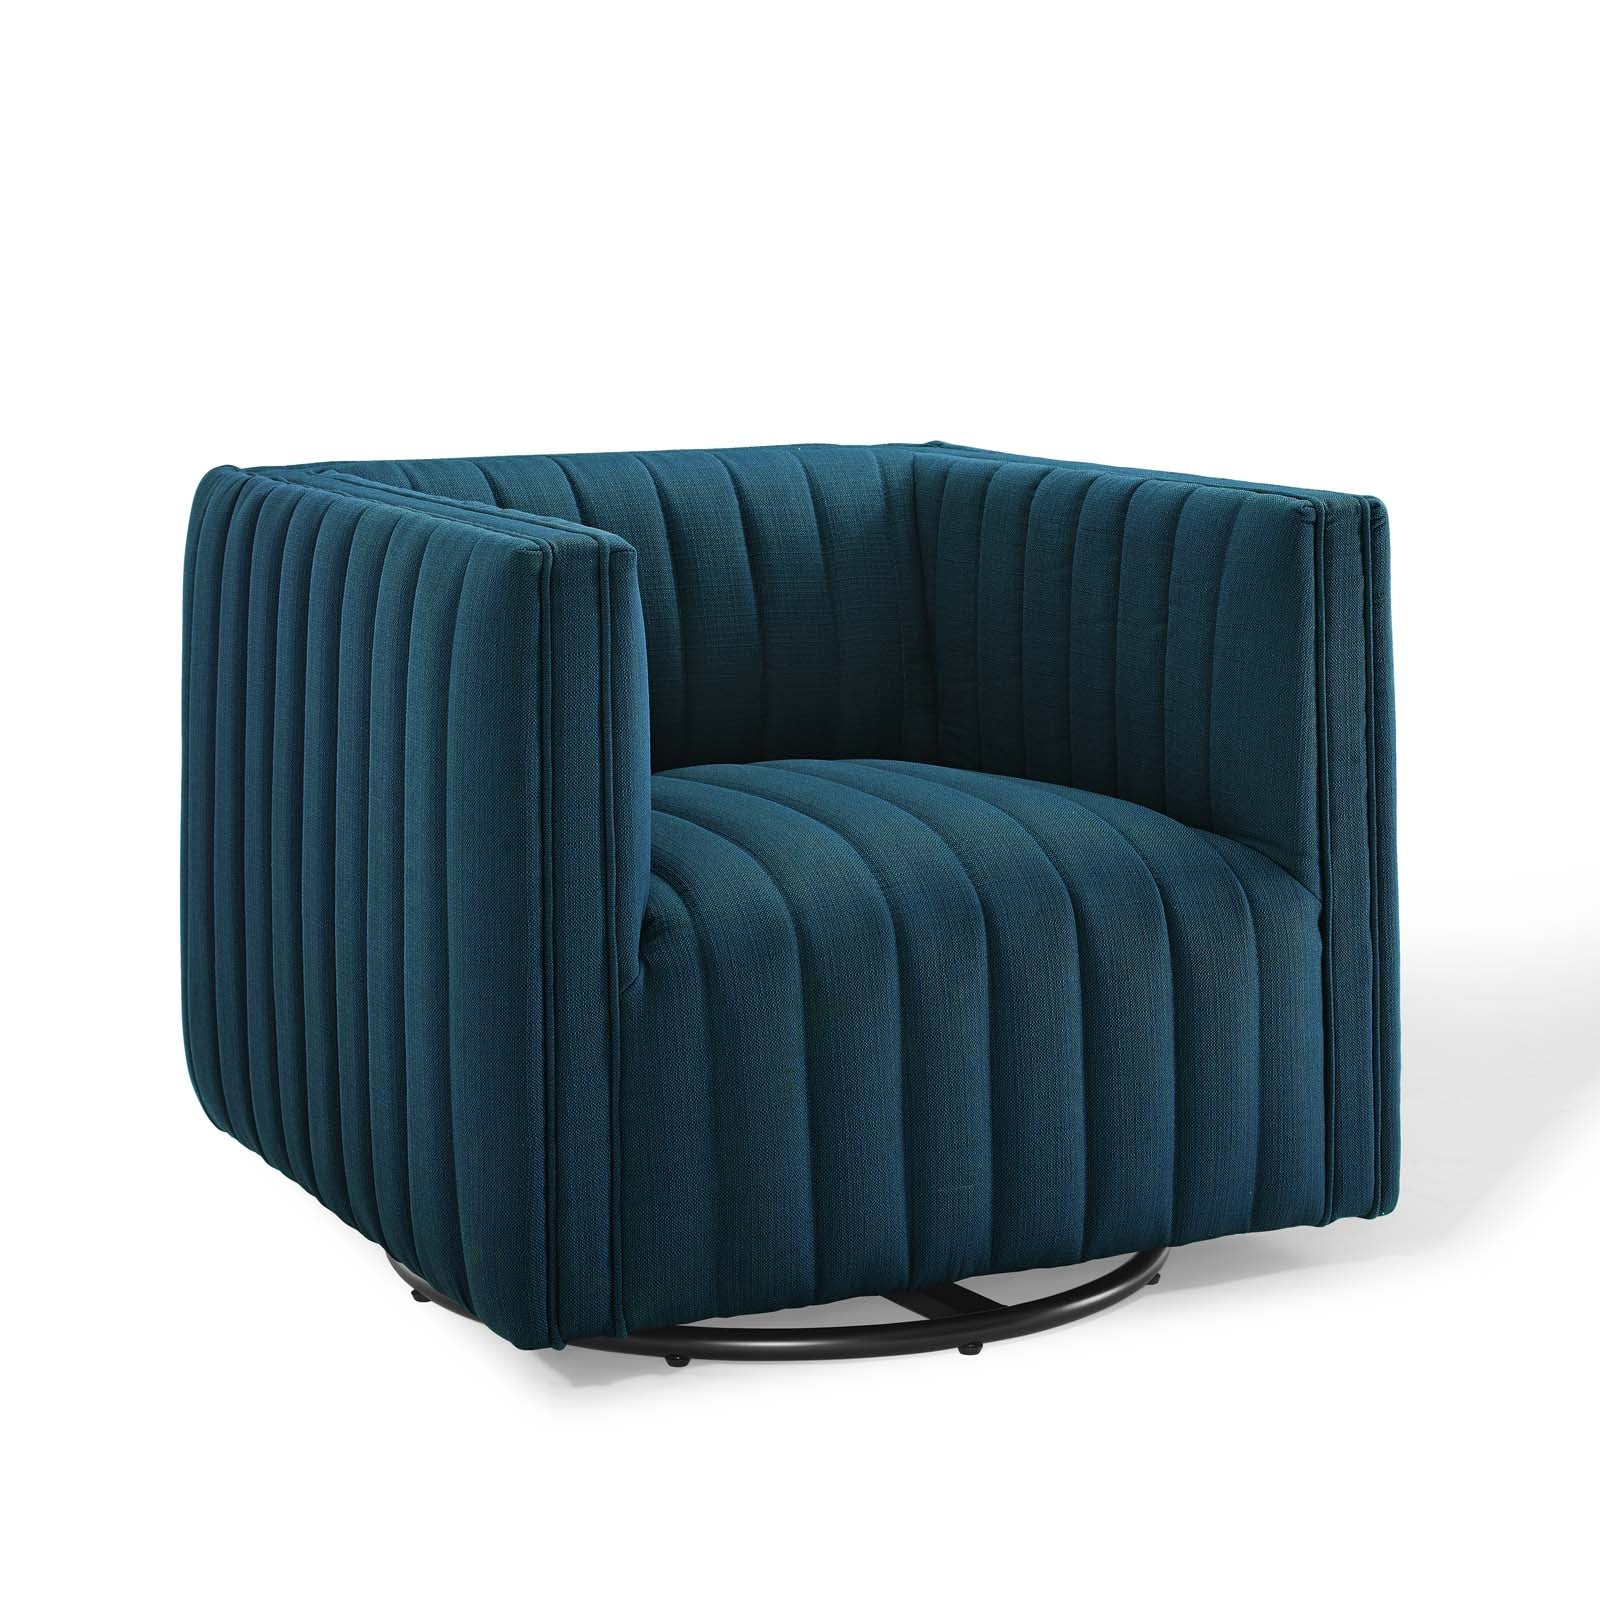 Modway Accent Chairs - Conjure Tufted Swivel Upholstered Armchair Azure